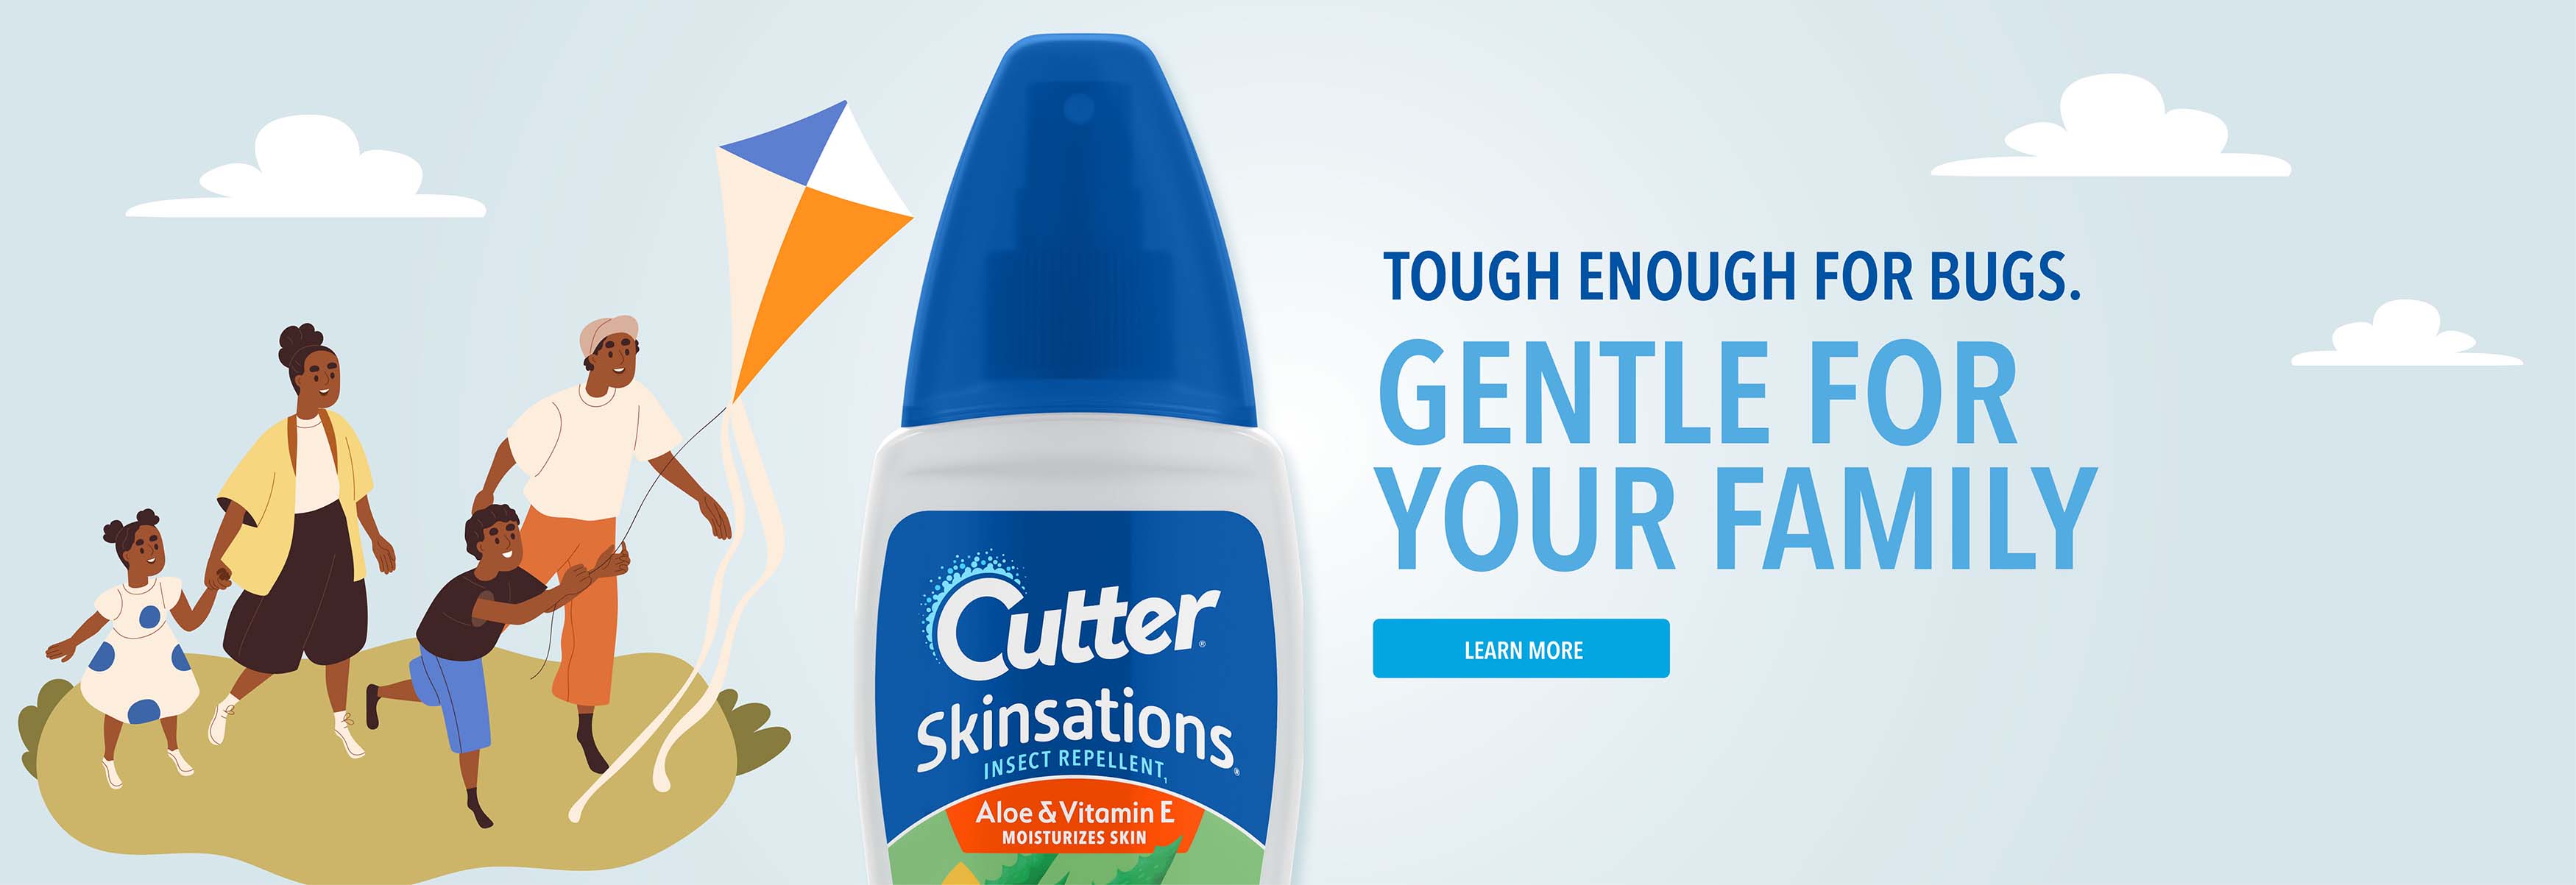 TOUGH ENOUGH FOR BUGS. GENTLE FOR YOUR FAMILY.